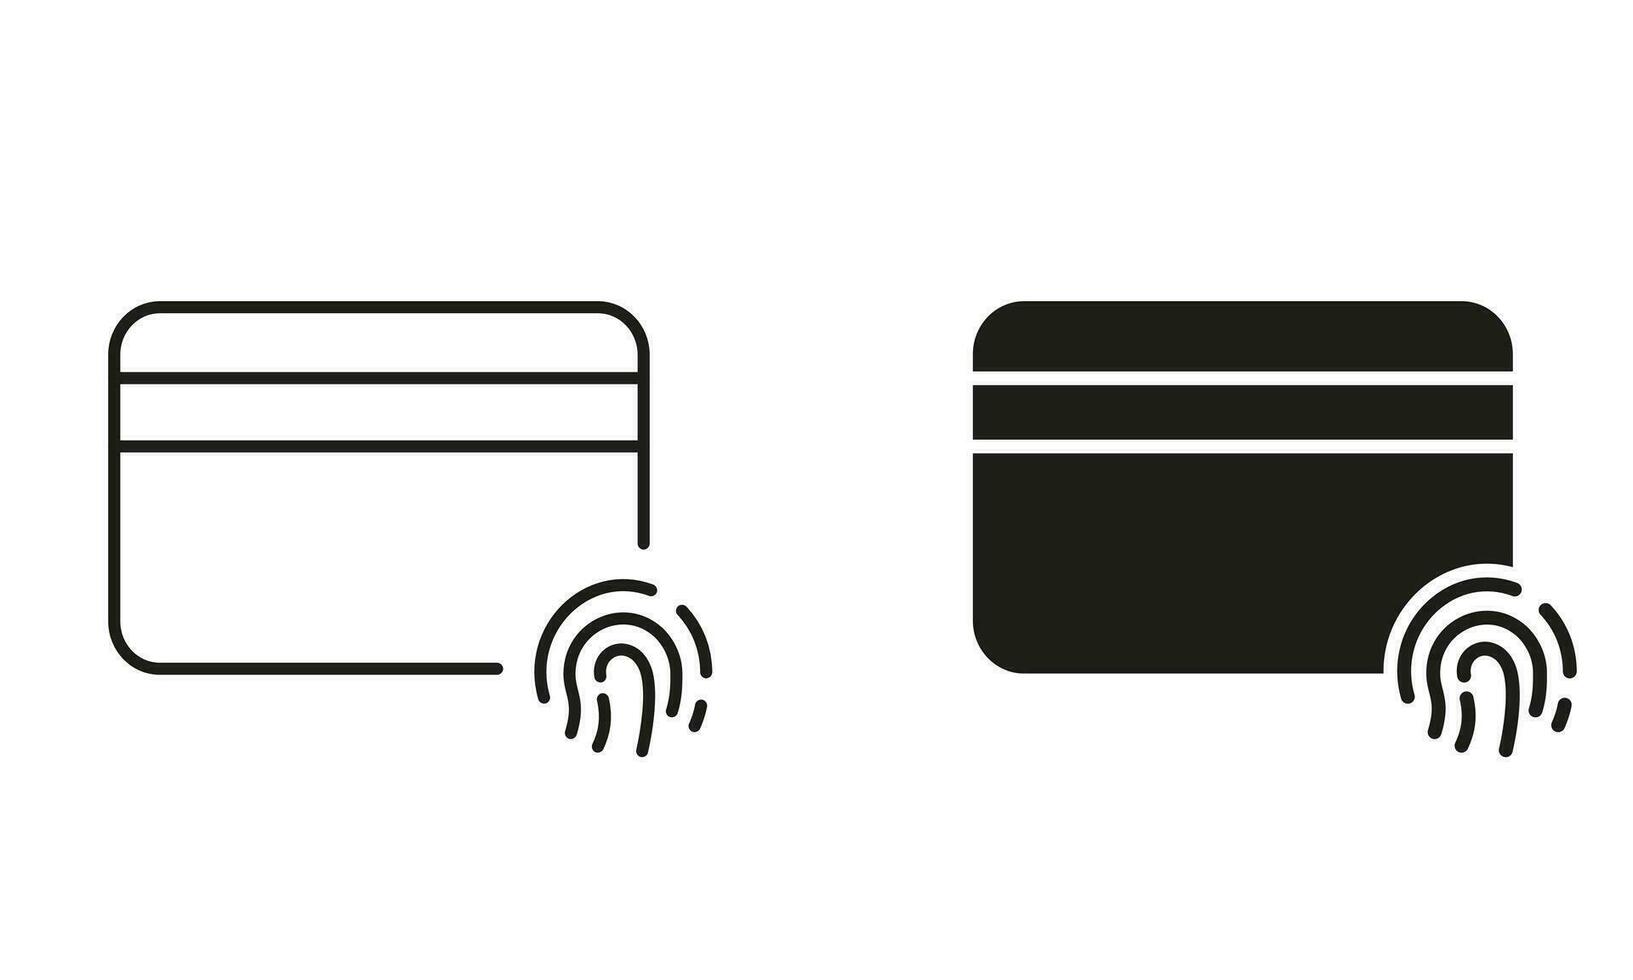 Credit Card with Fingerprint Line and Silhouette Icon Set. Identification Technology Sign. Financial Identity by Fingerprint Pictogram. Plastic Card with Thumbprint. Isolated Vector Illustration.